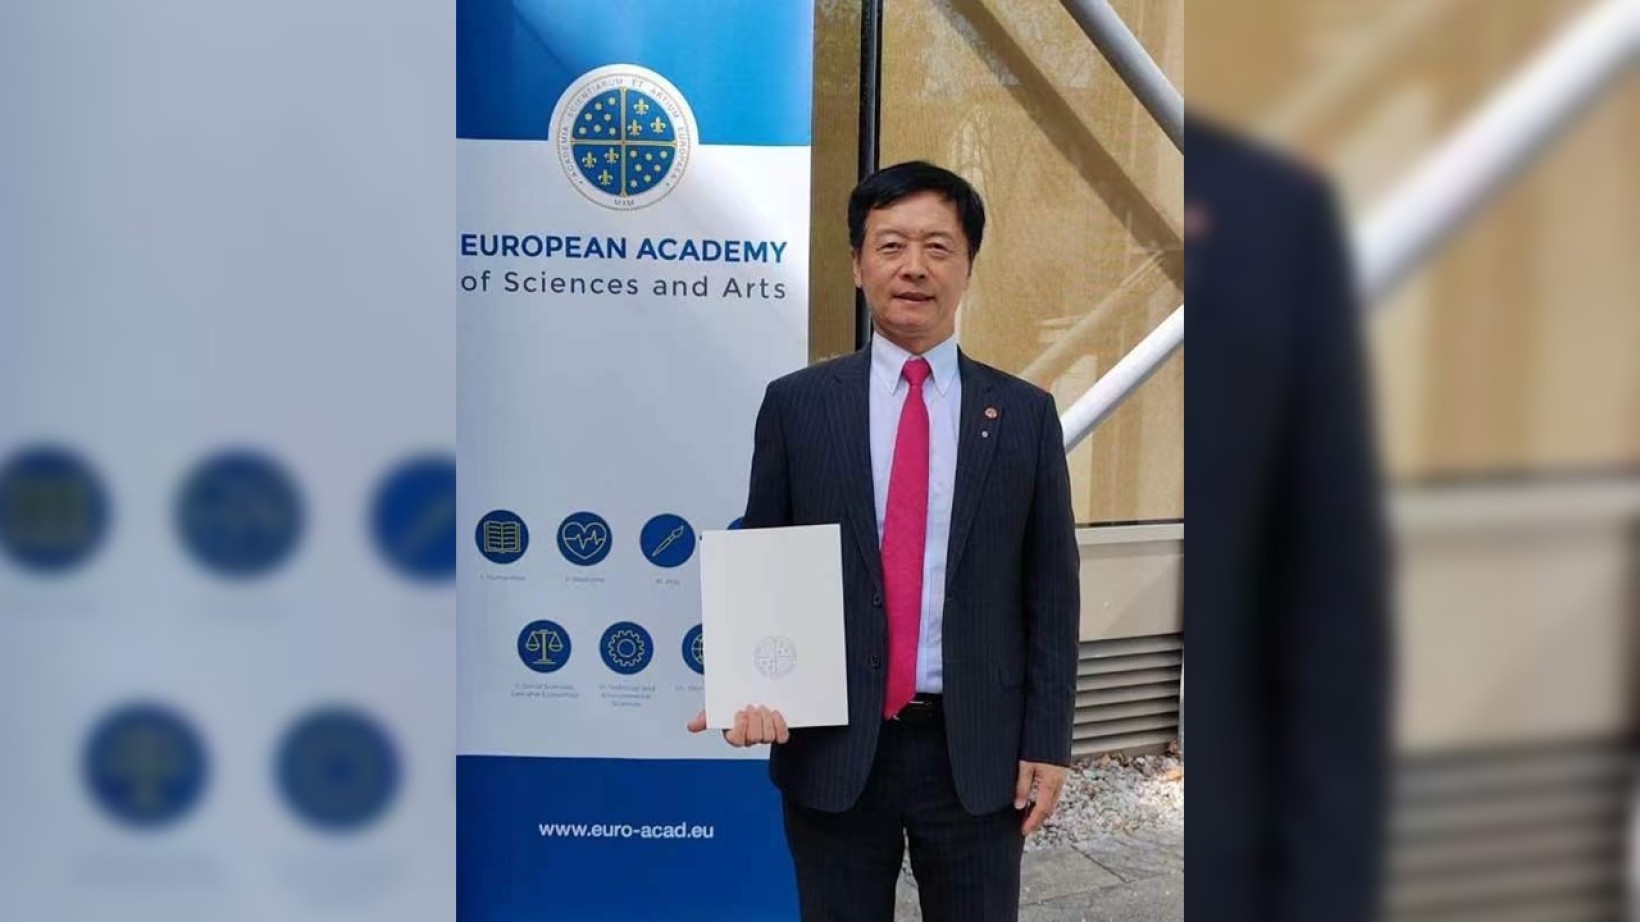 Lingnan University President S. Joe Qin elected a Member of the European Academy of Sciences and Arts. The inauguration of the new members takes place on 6 April 2024 in Austria.